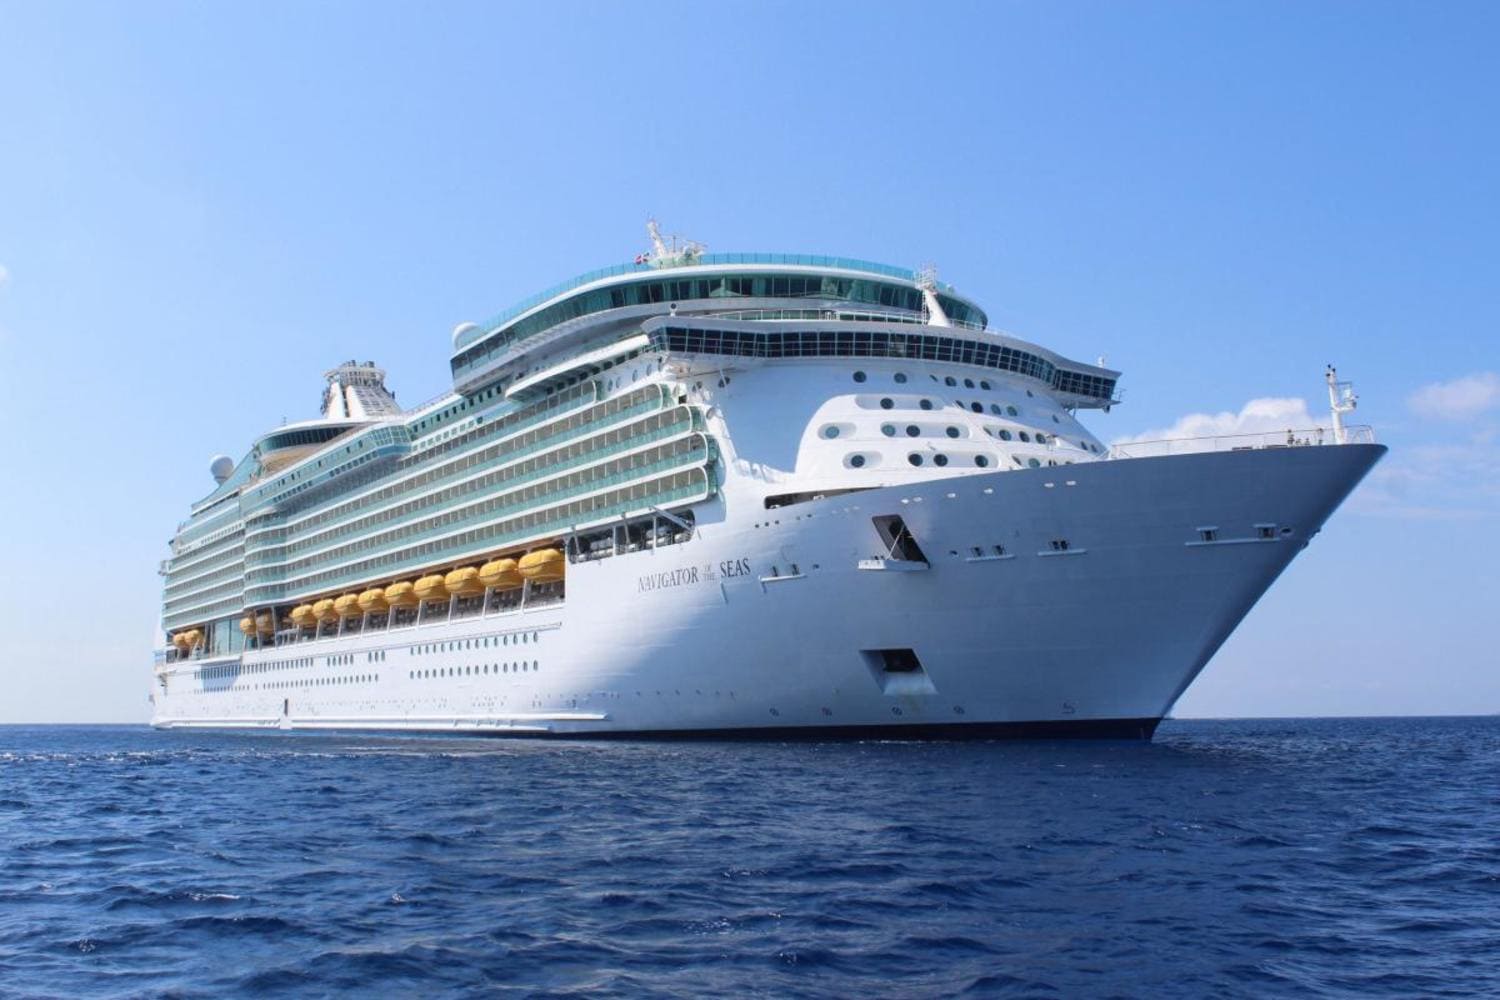 Royal Caribbean will accept only vaccinated passengers on the next Caribbean cruise